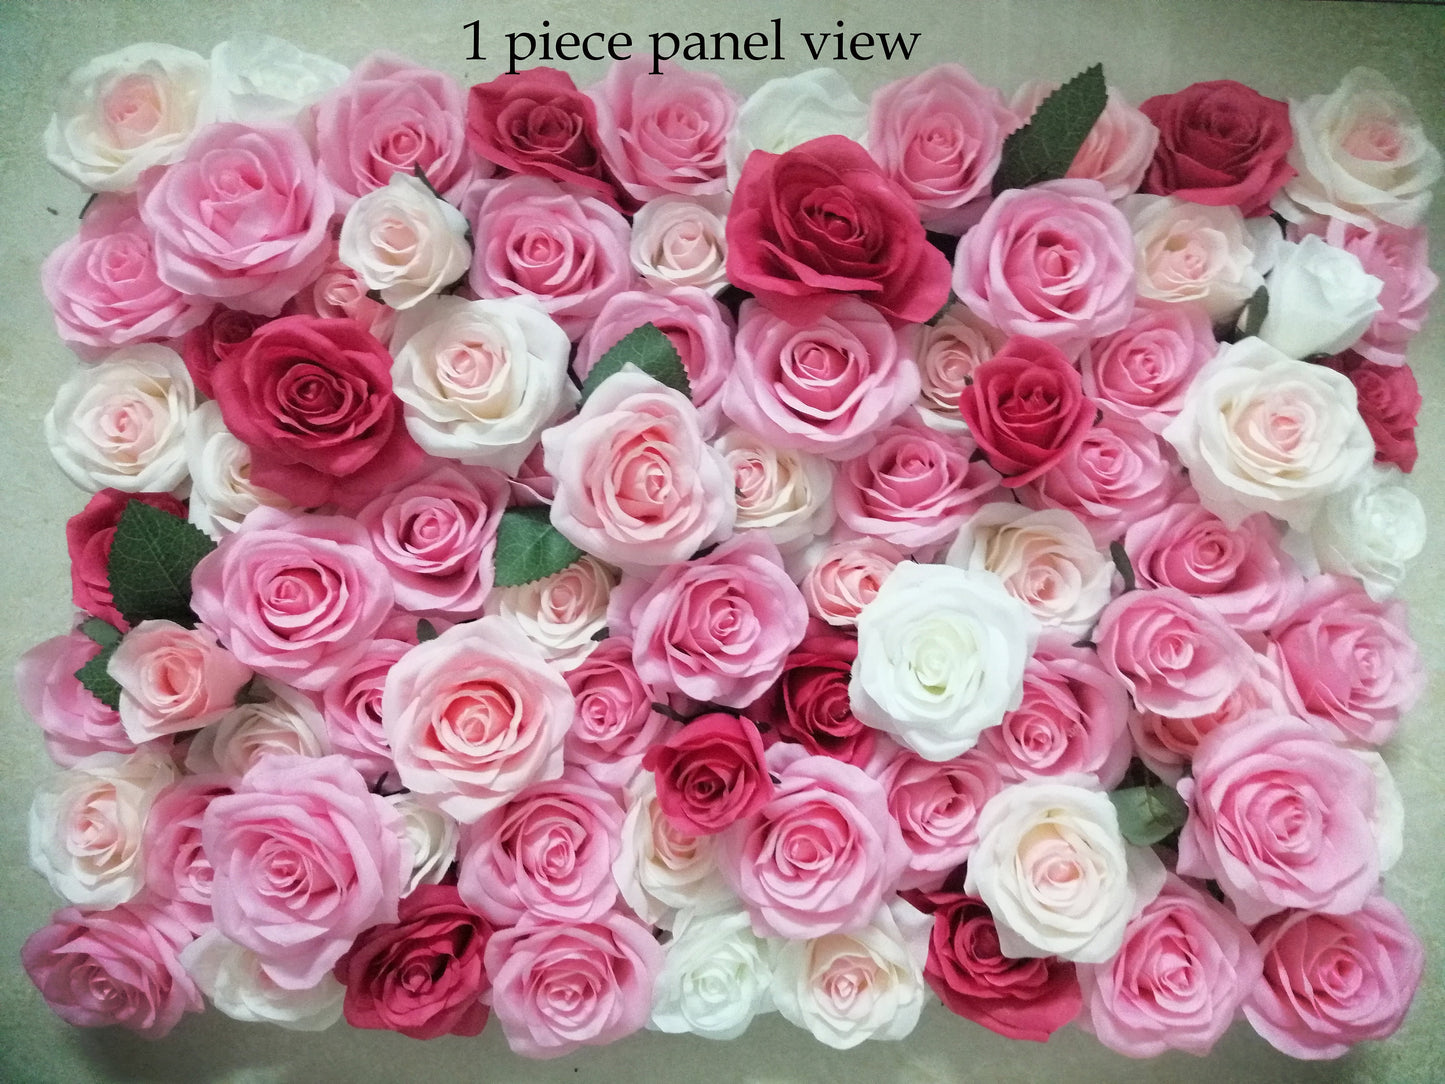 Artificial Flower Wall For Wedding Photography Backdrop Baby Shower Special Event Salon Arrangement Decor Floral Panels 15.75x23.62inches